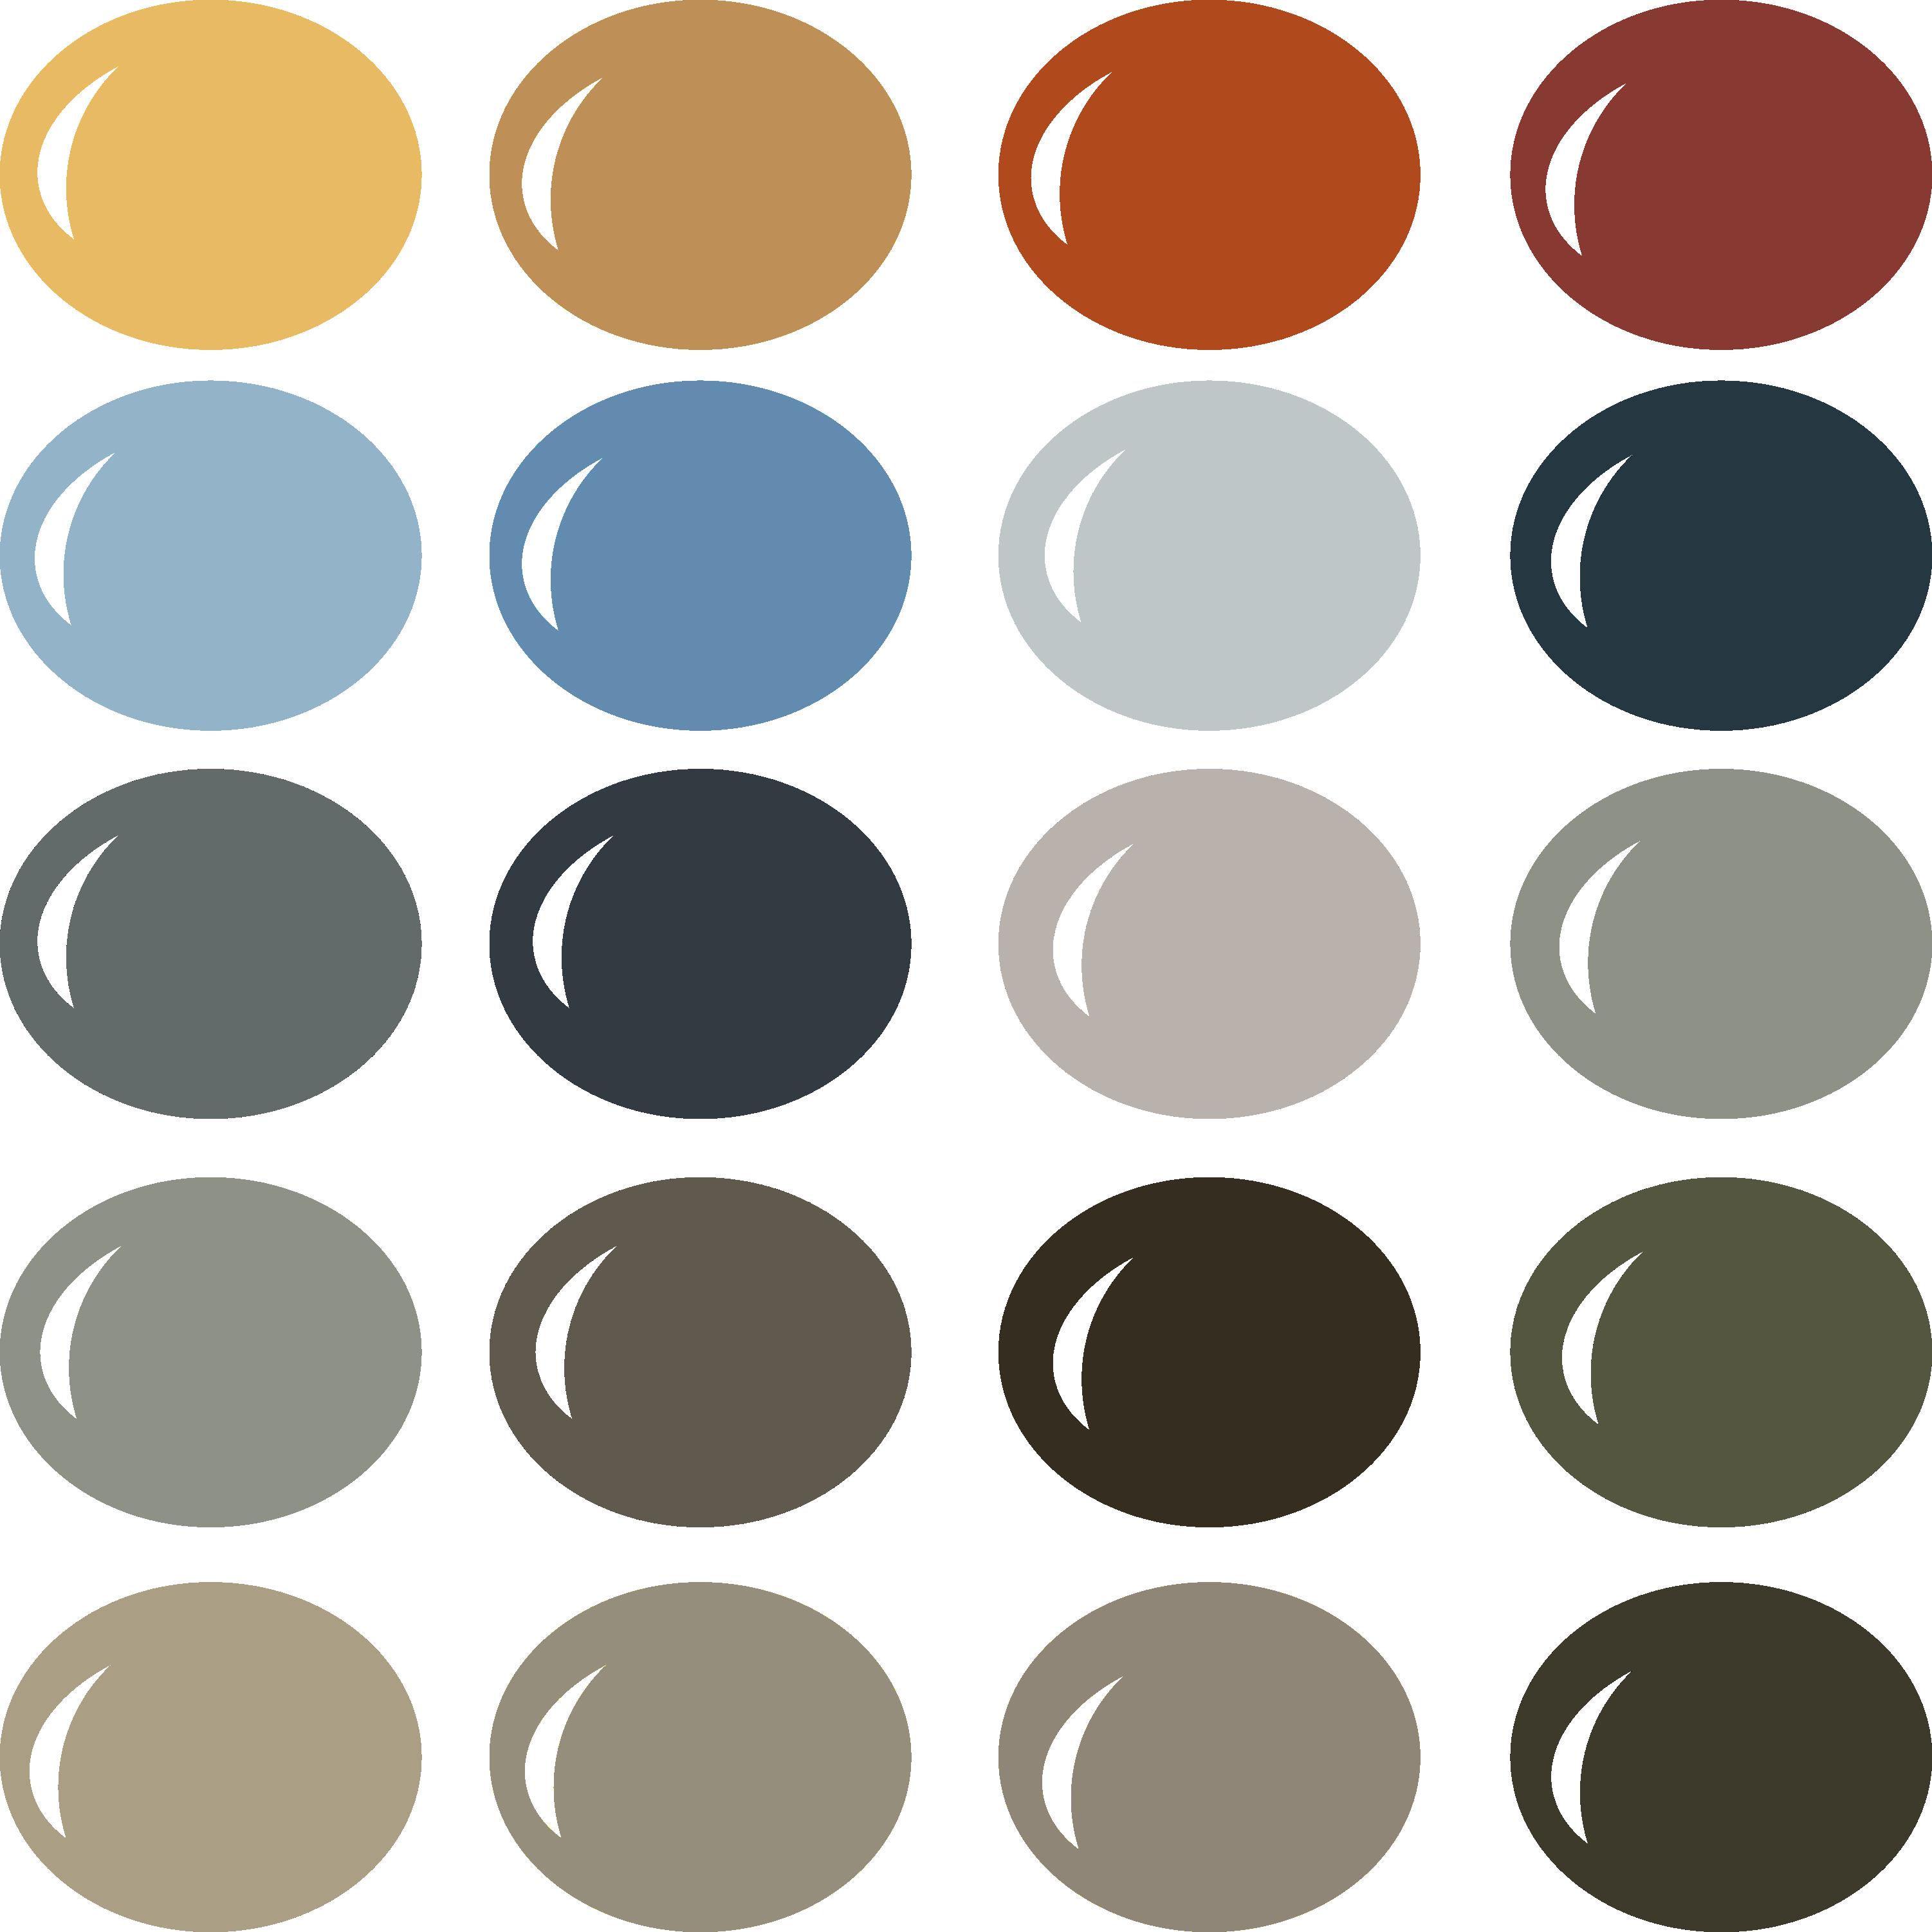 Game of Thrones Color Palette